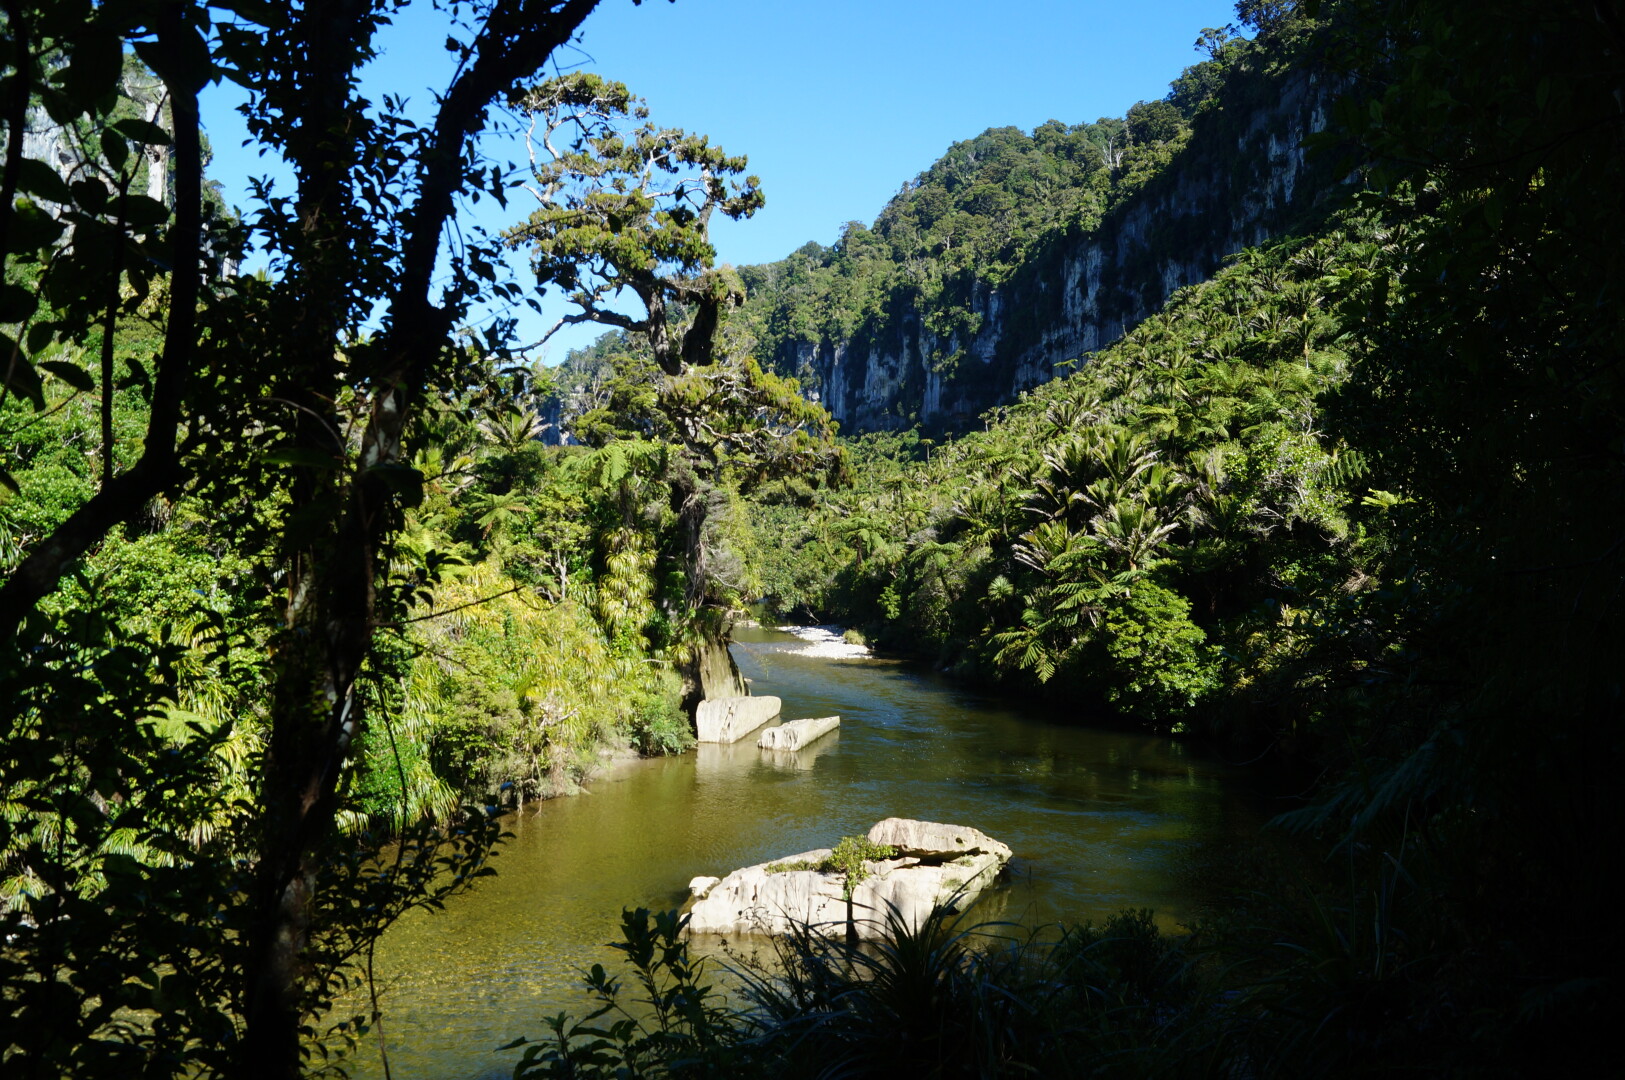 Hiking on the South Island's West Coast. Lush rainforest, Limestone/Karst landscape, right next to the ocean and the walks at Pancake Rock (Punakaiki).